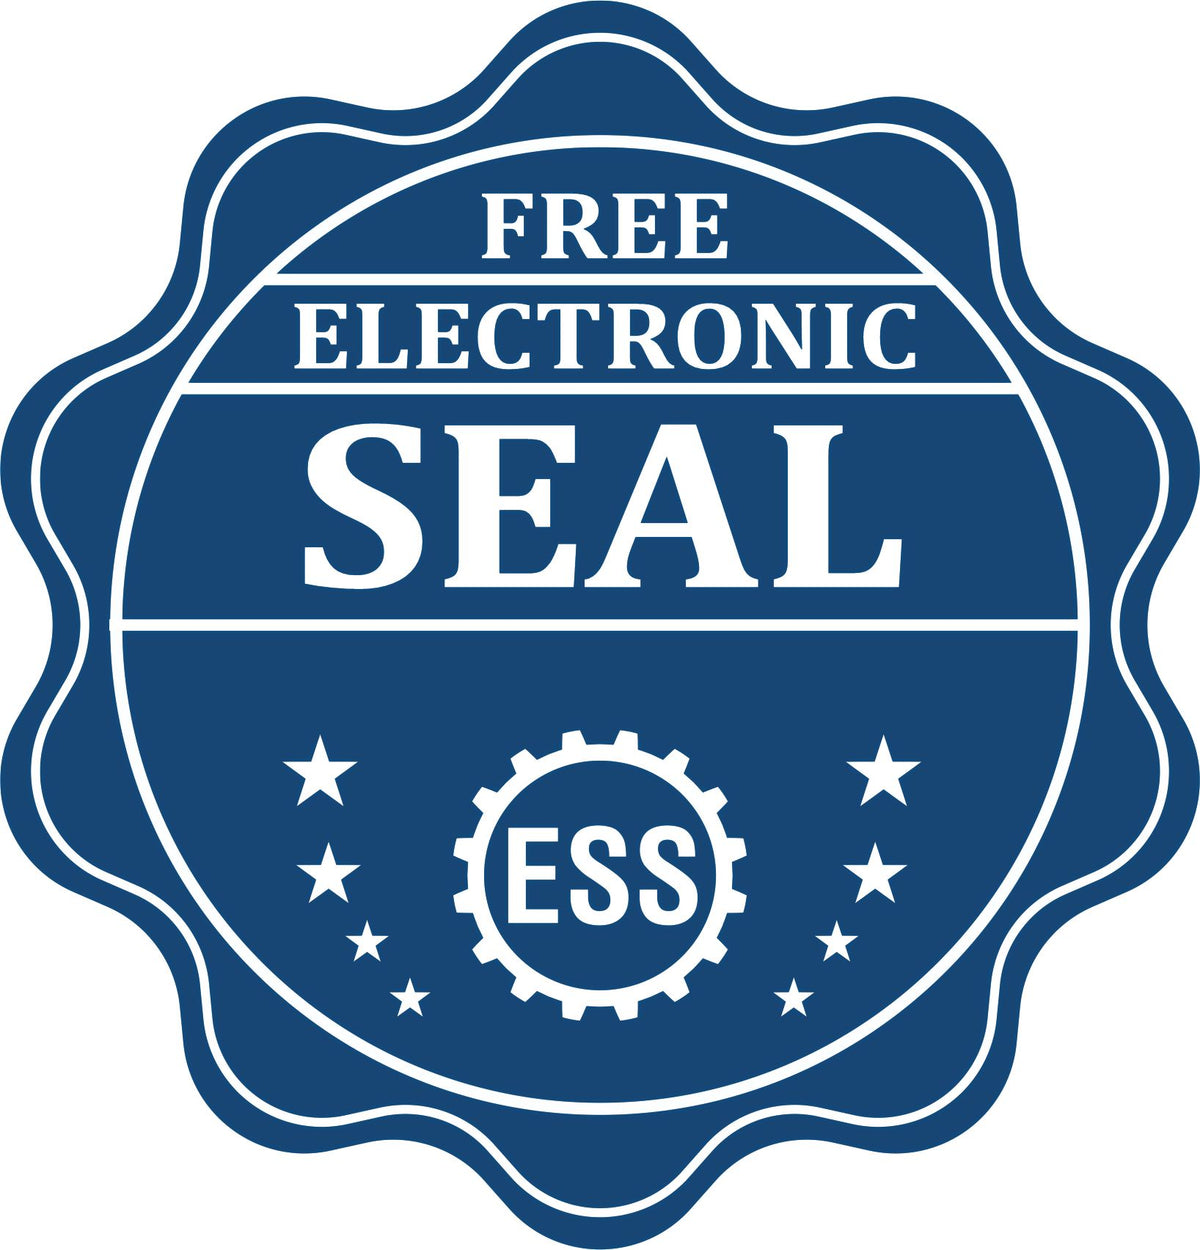 A badge showing a free electronic seal for the Soft Idaho Professional Geologist Seal with stars and the ESS gear on the emblem.